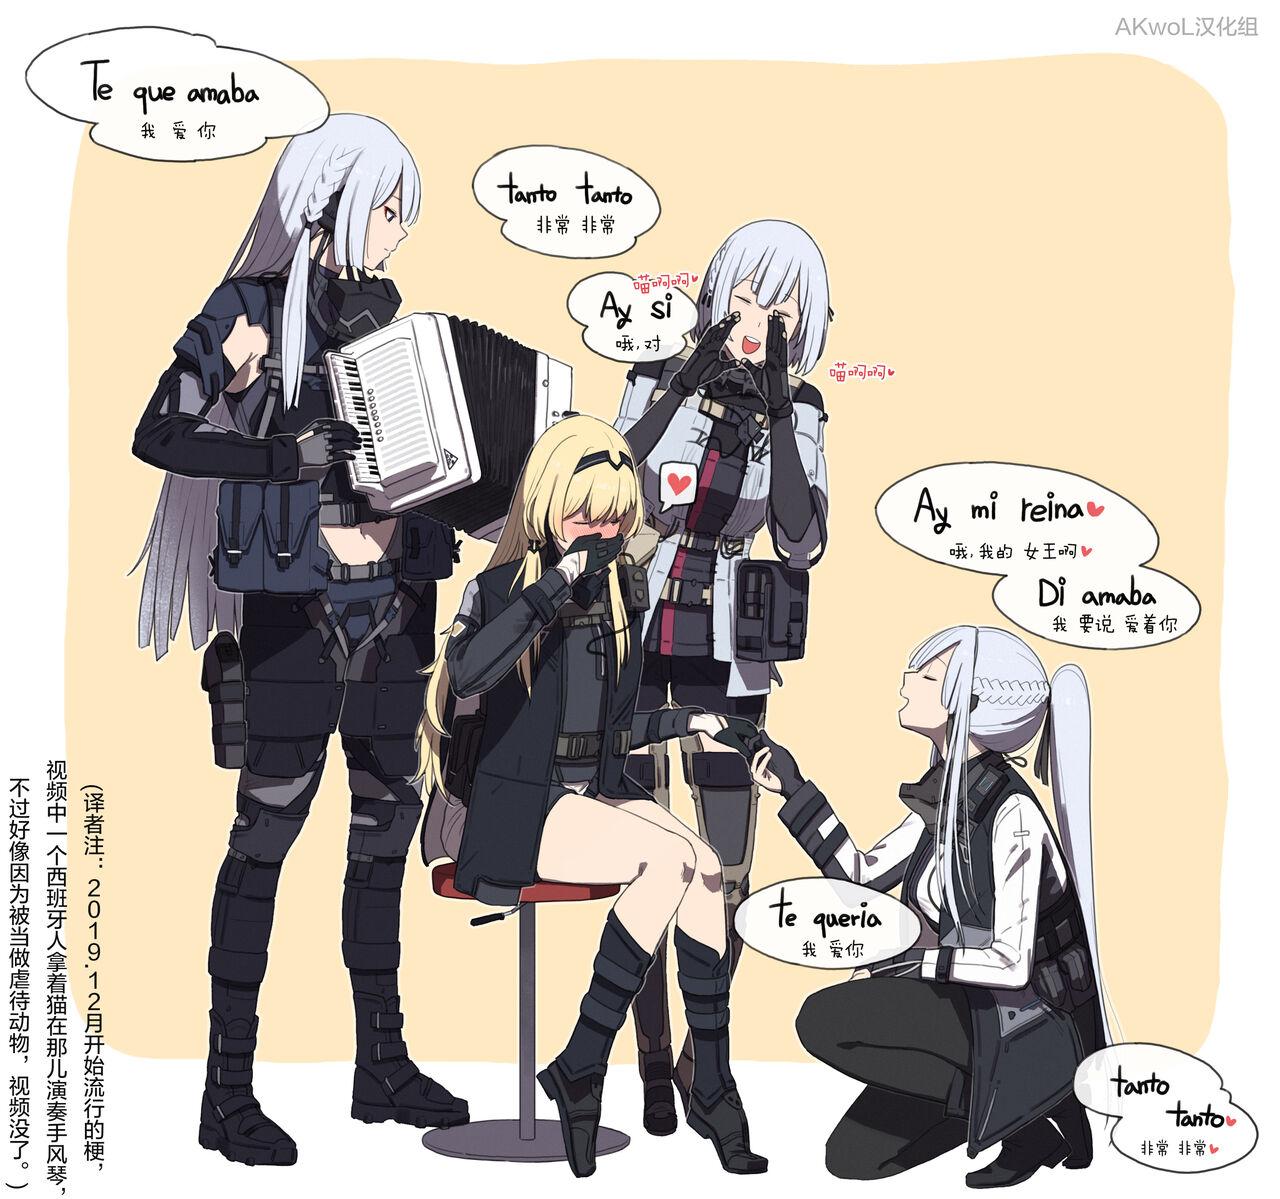 Nut Patreon 2020.01-2020.12 - Girls frontline Gay Blondhair - Picture 1